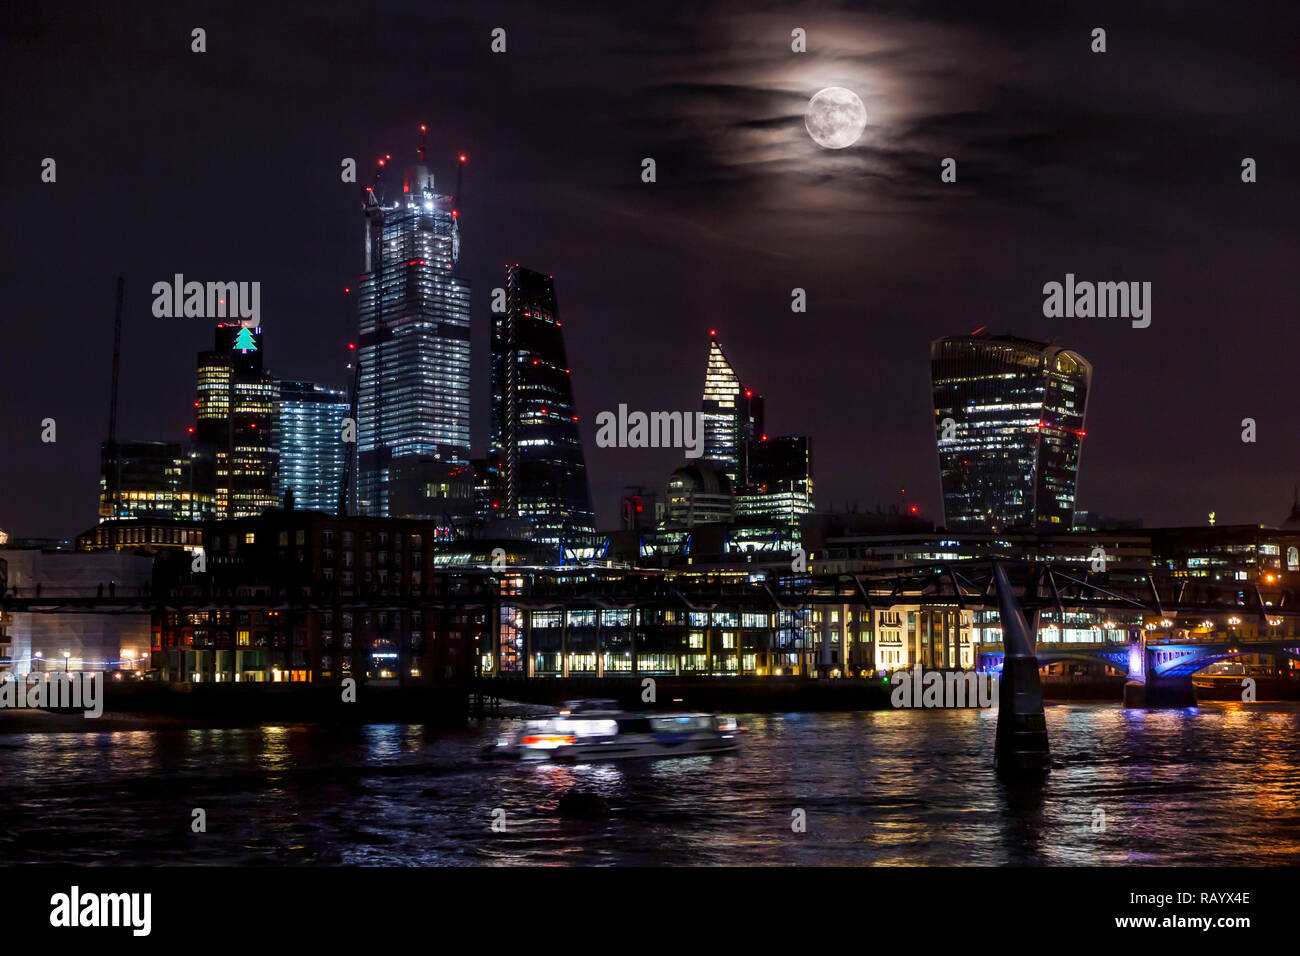 A very large moon rises from behind the towers of the City of London in an unusual display Stock Photo